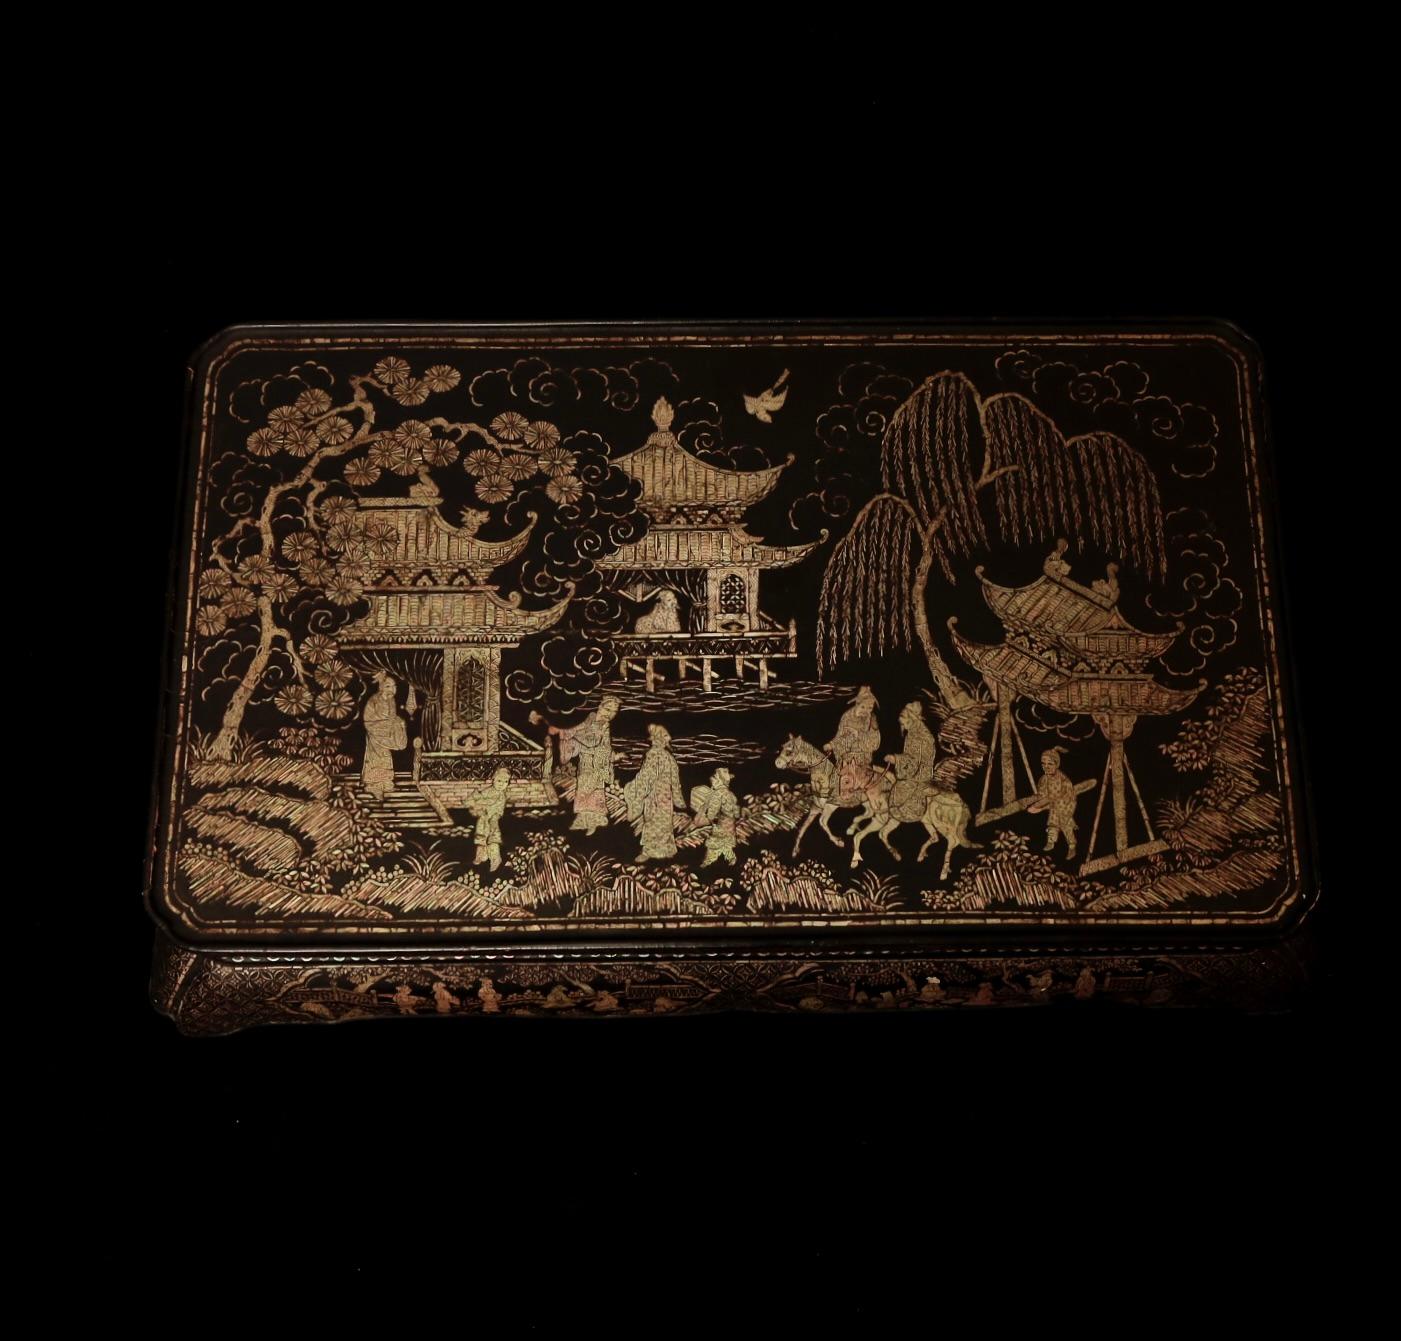 Wood Ming Dynasty Period Scholar's Garden: Mother-of-Pearl Inlaid Lacquer Kang Table For Sale